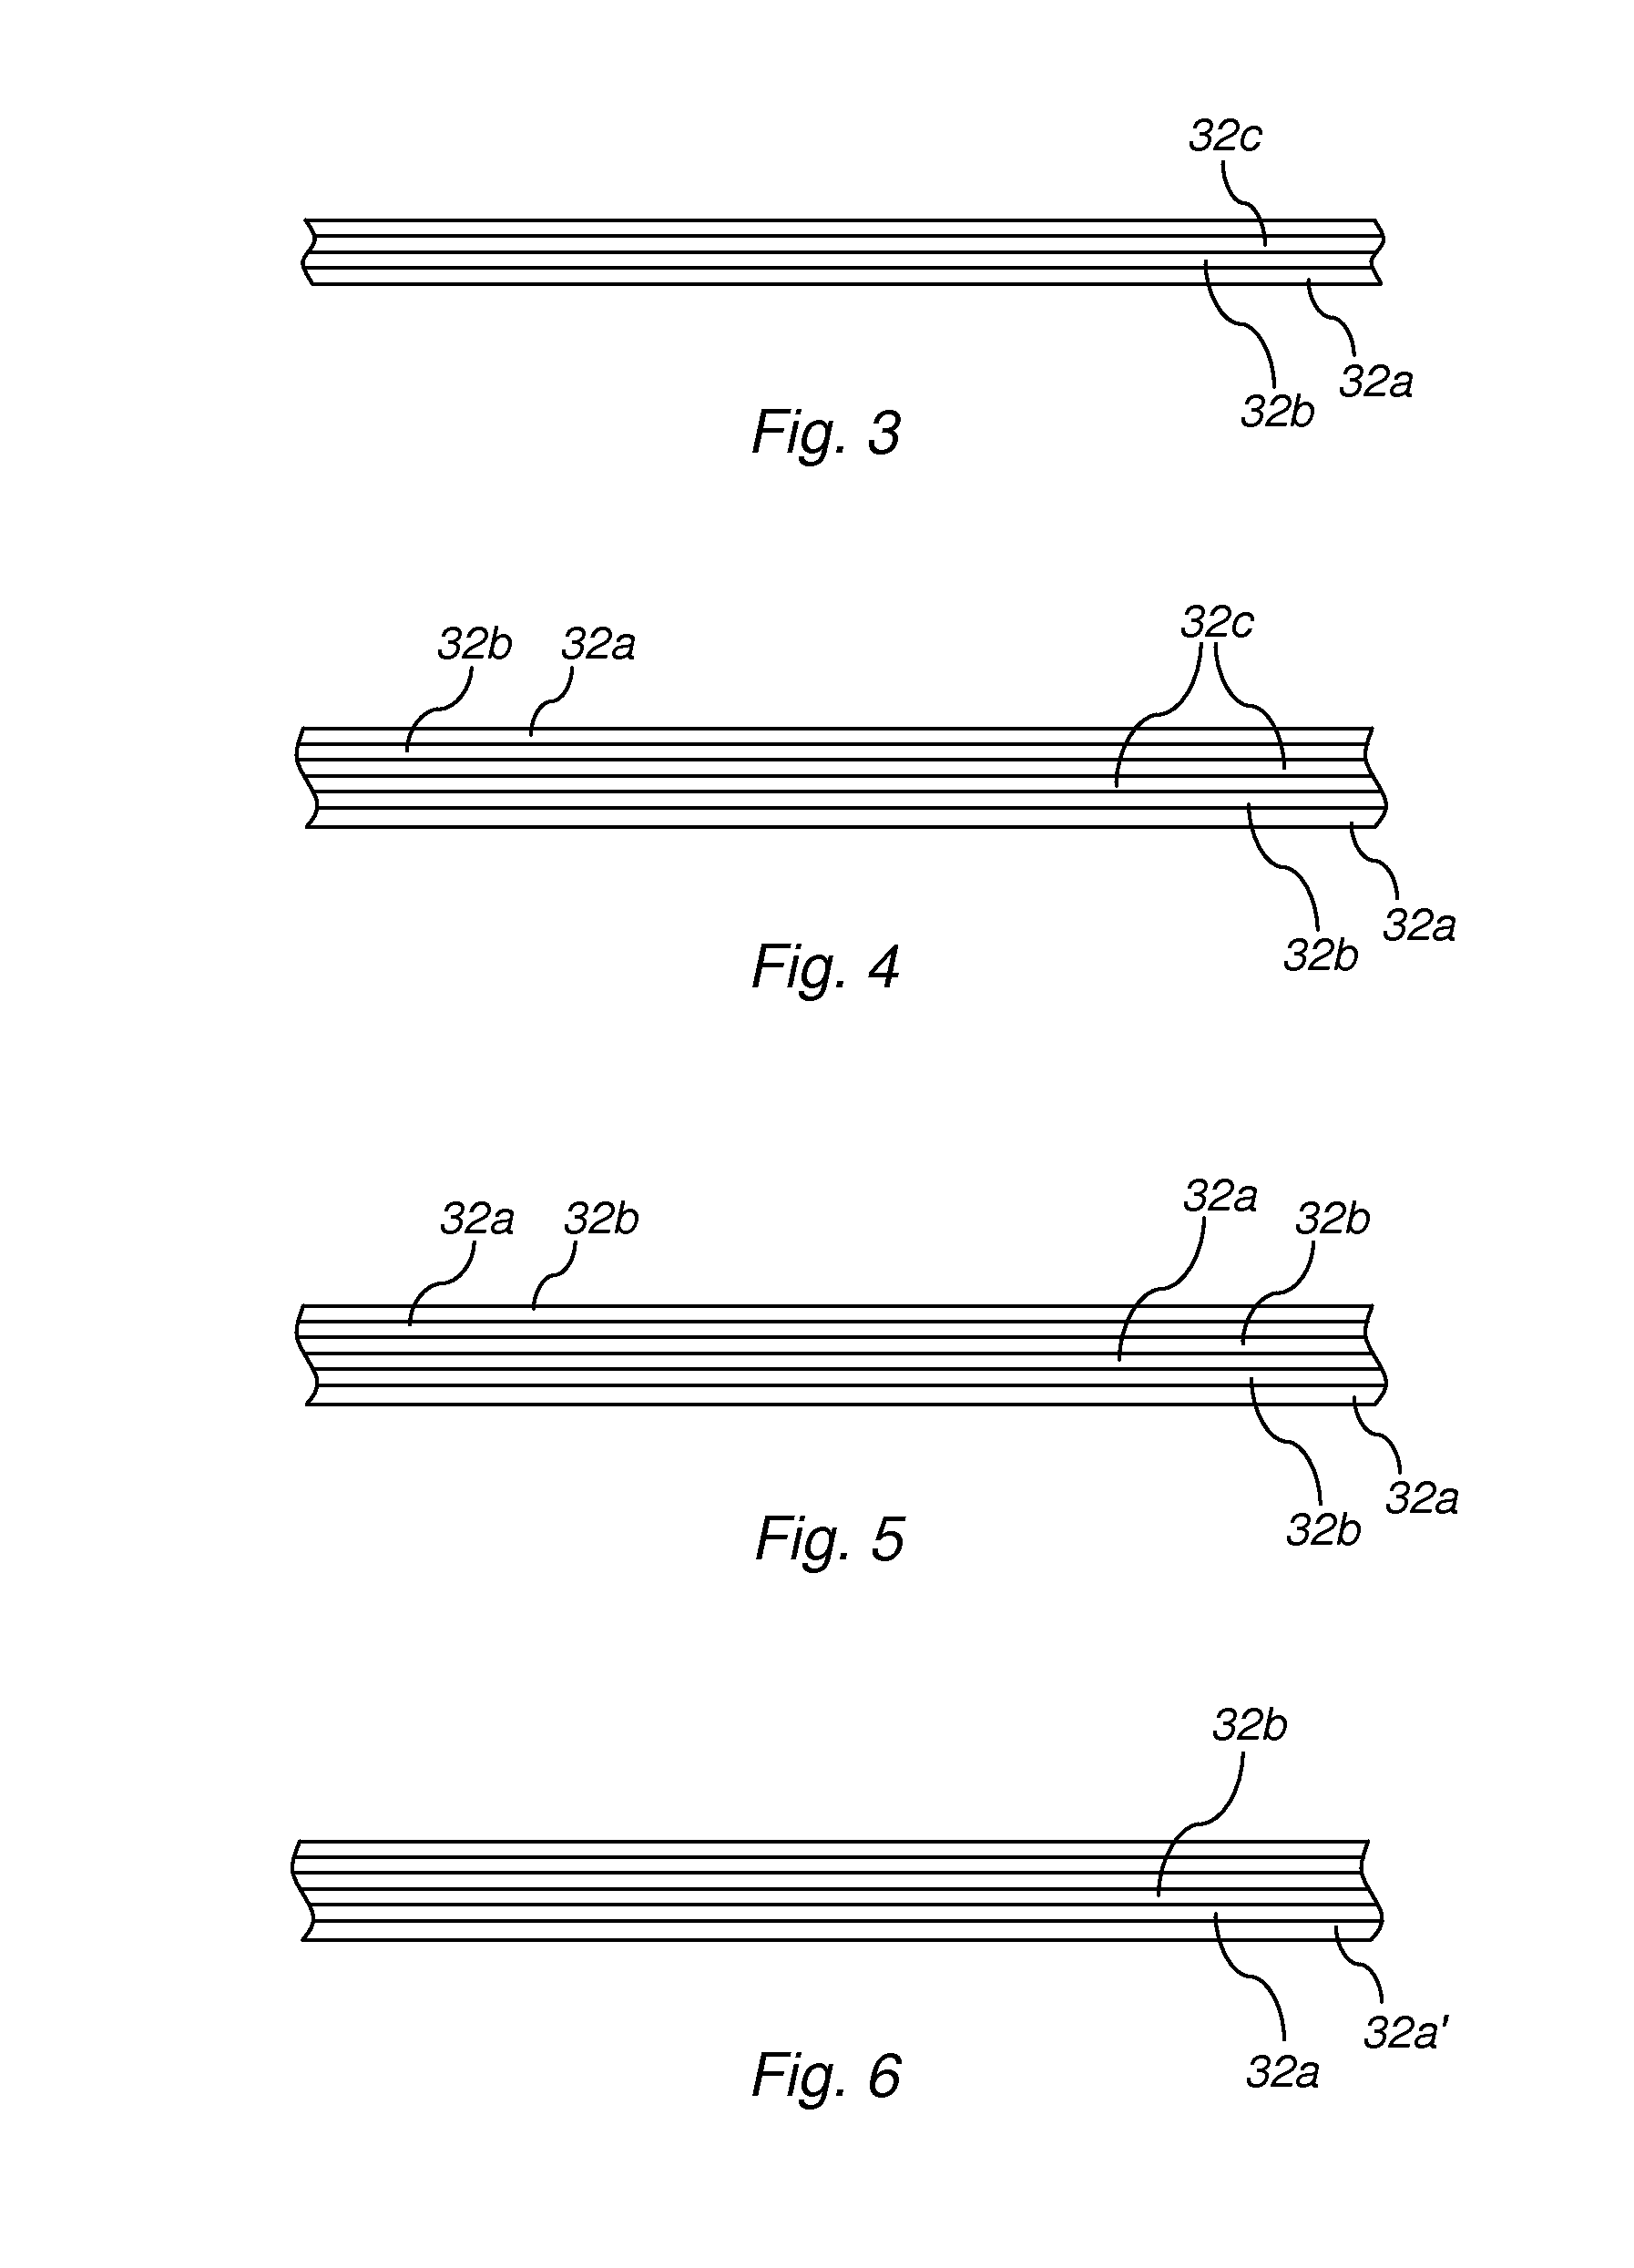 Apparatuses and methods employing multiple layers for attenuating ionizing radiation